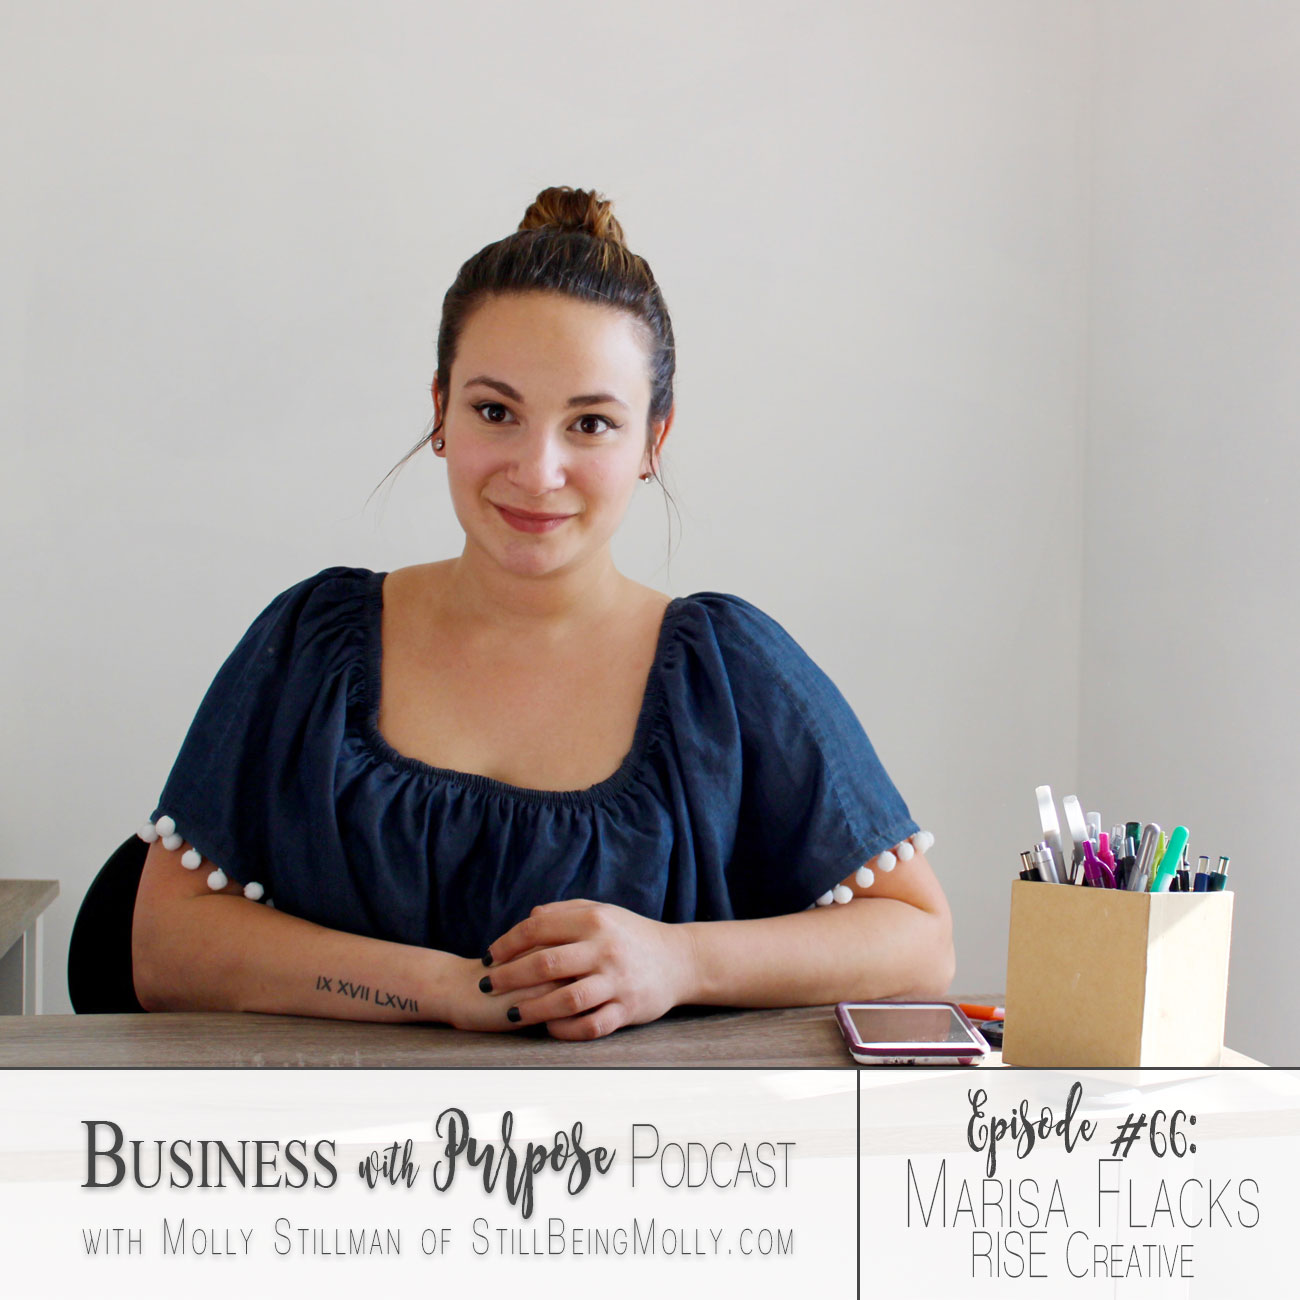 Business with Purpose Podcast EP 66: Marisa Flacks, Founder of RISE Creative by North Carolina blogger Still Being Molly